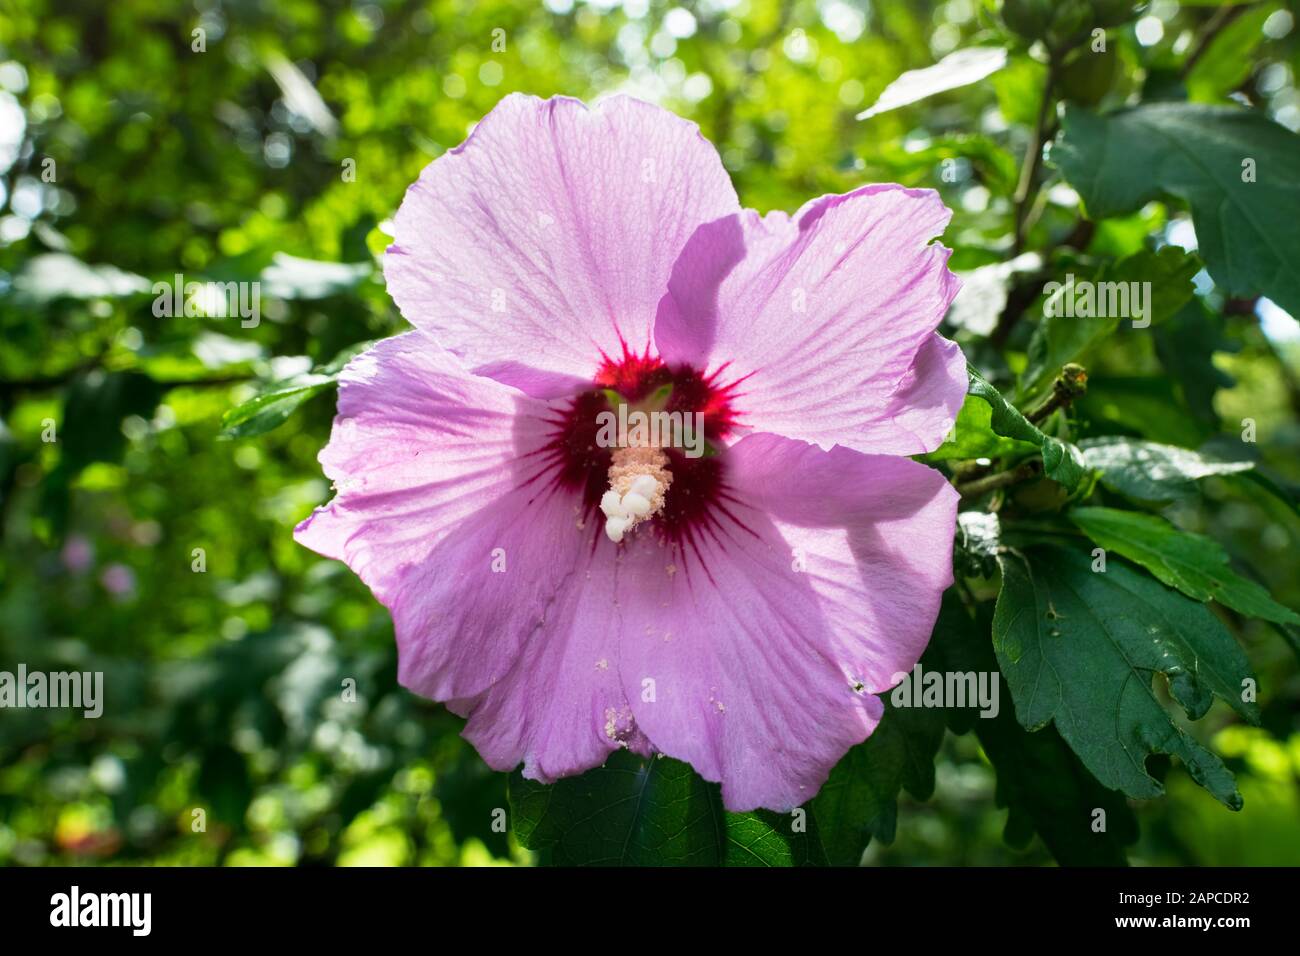 Close up of large pink flower of Hibiscus syriacus (Rose of Sharon or Rose mallow) in a backyard garden Stock Photo